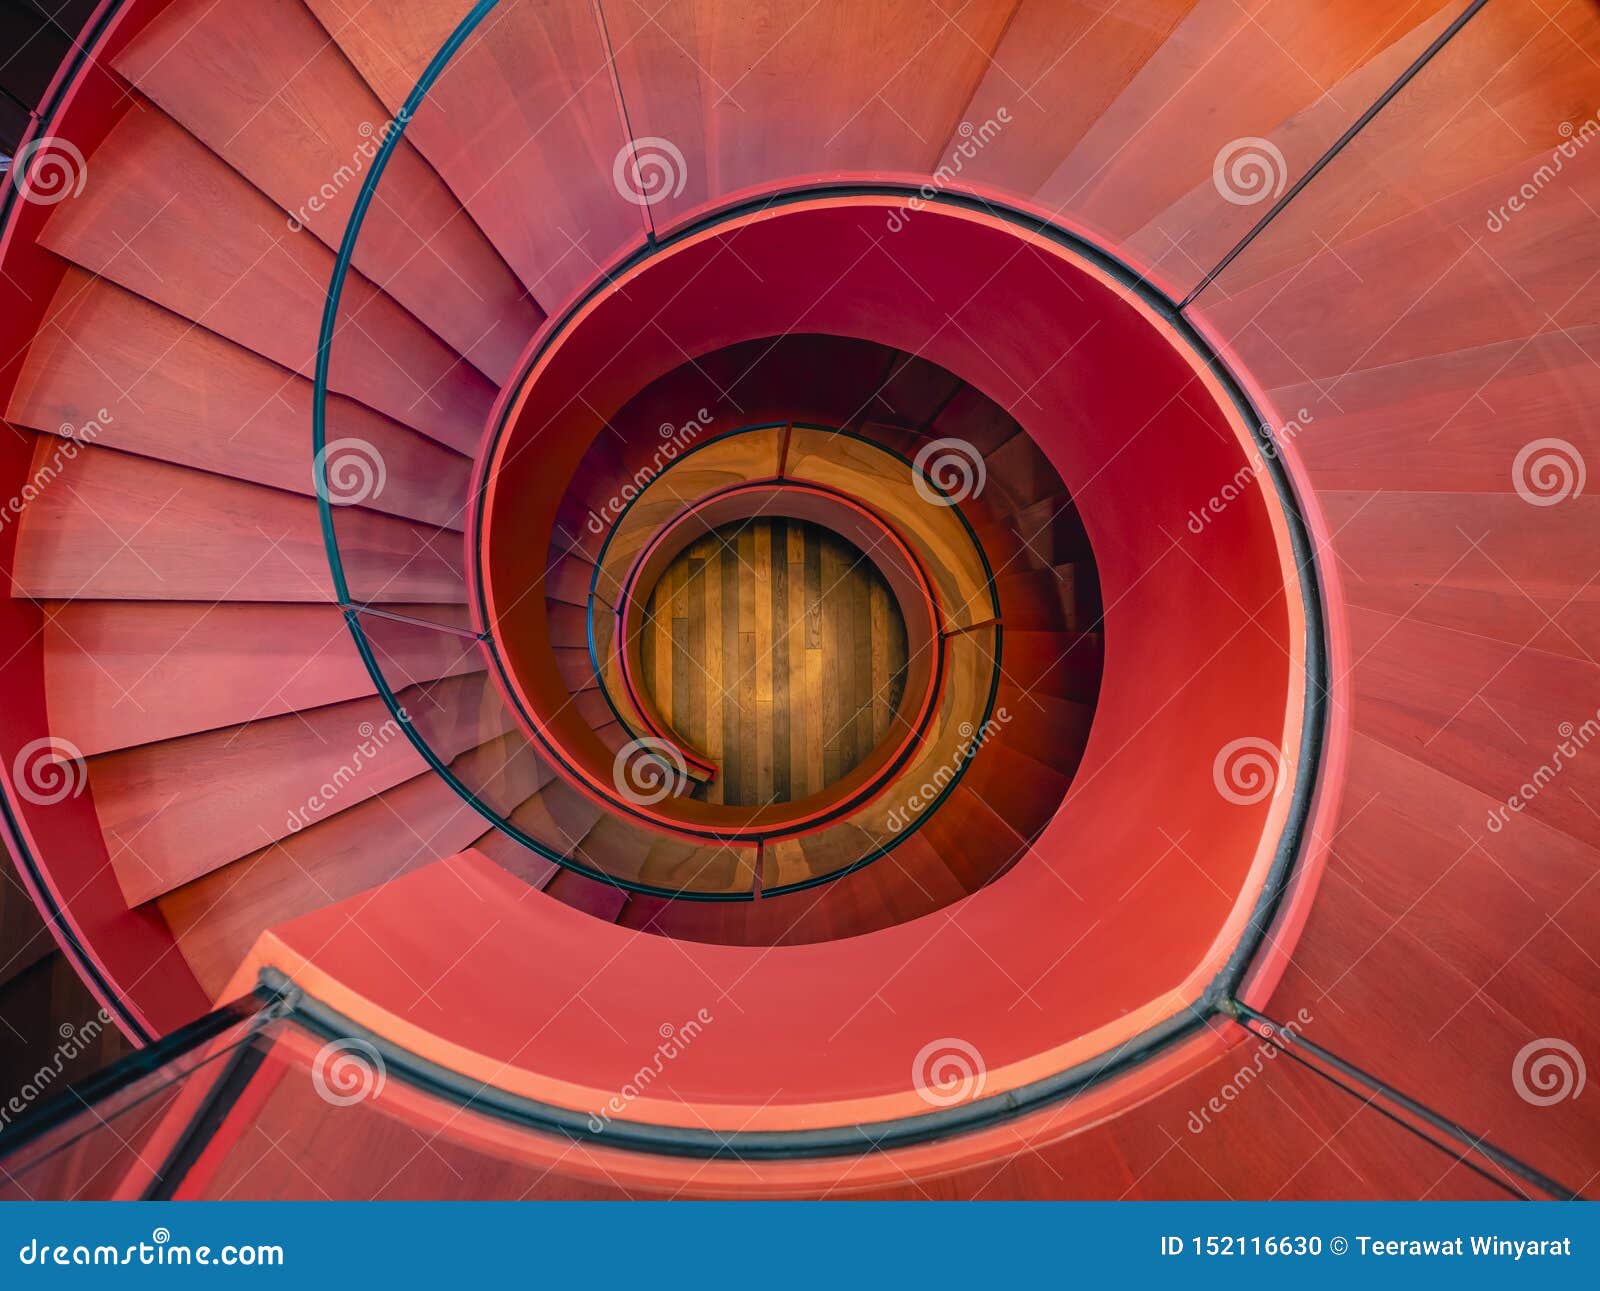 spiral staircase modern architecture detail red colour abstract background